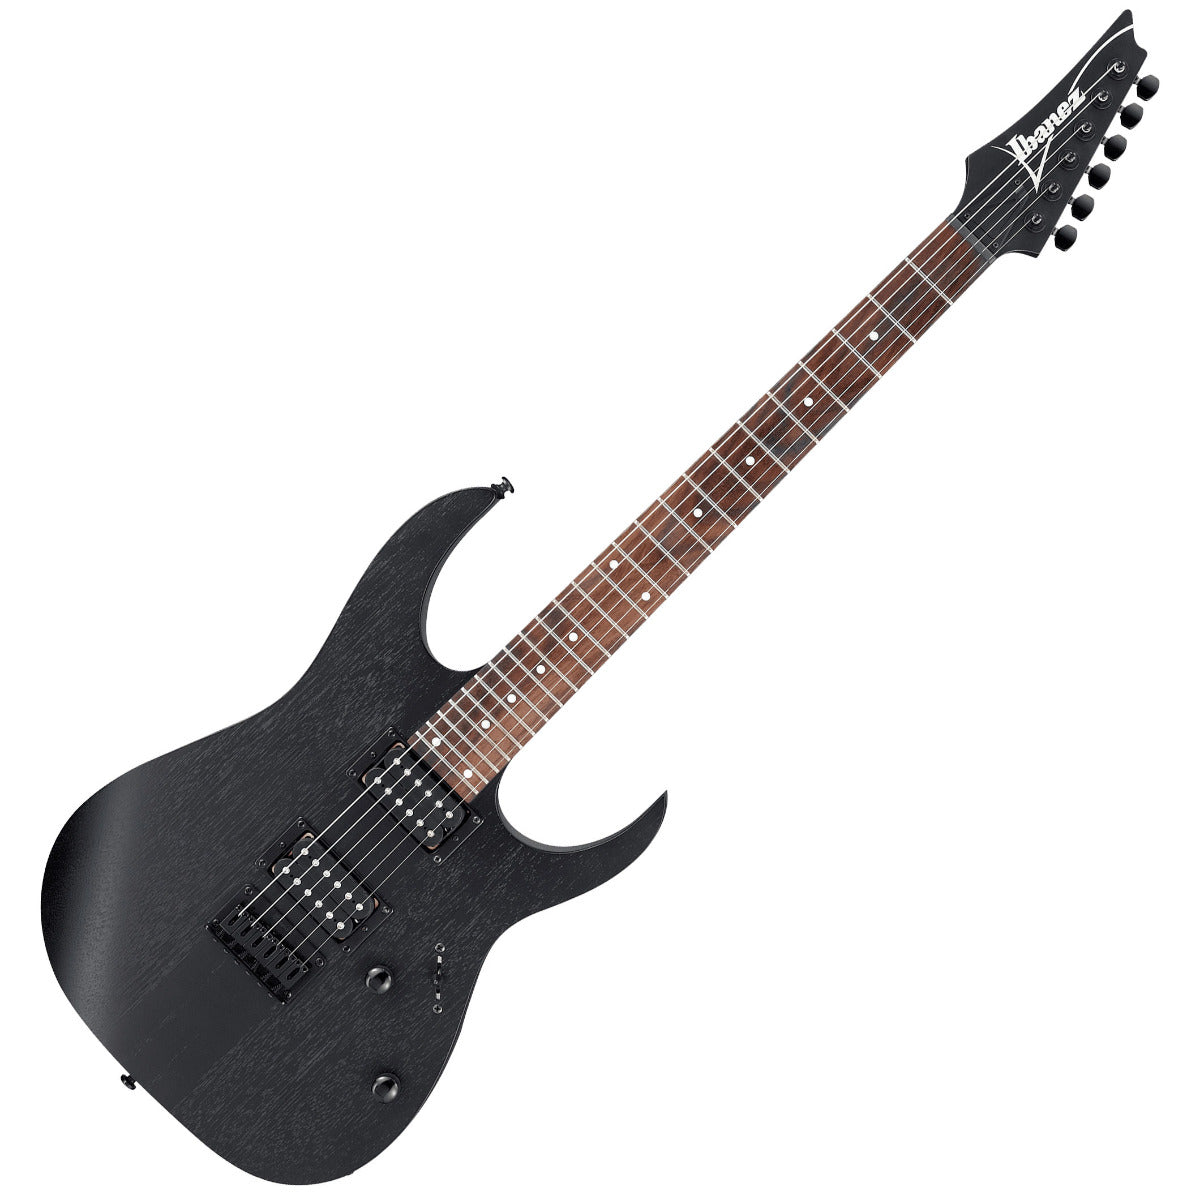 Ibanez RGRT421 Electric Guitar - Weathered Black